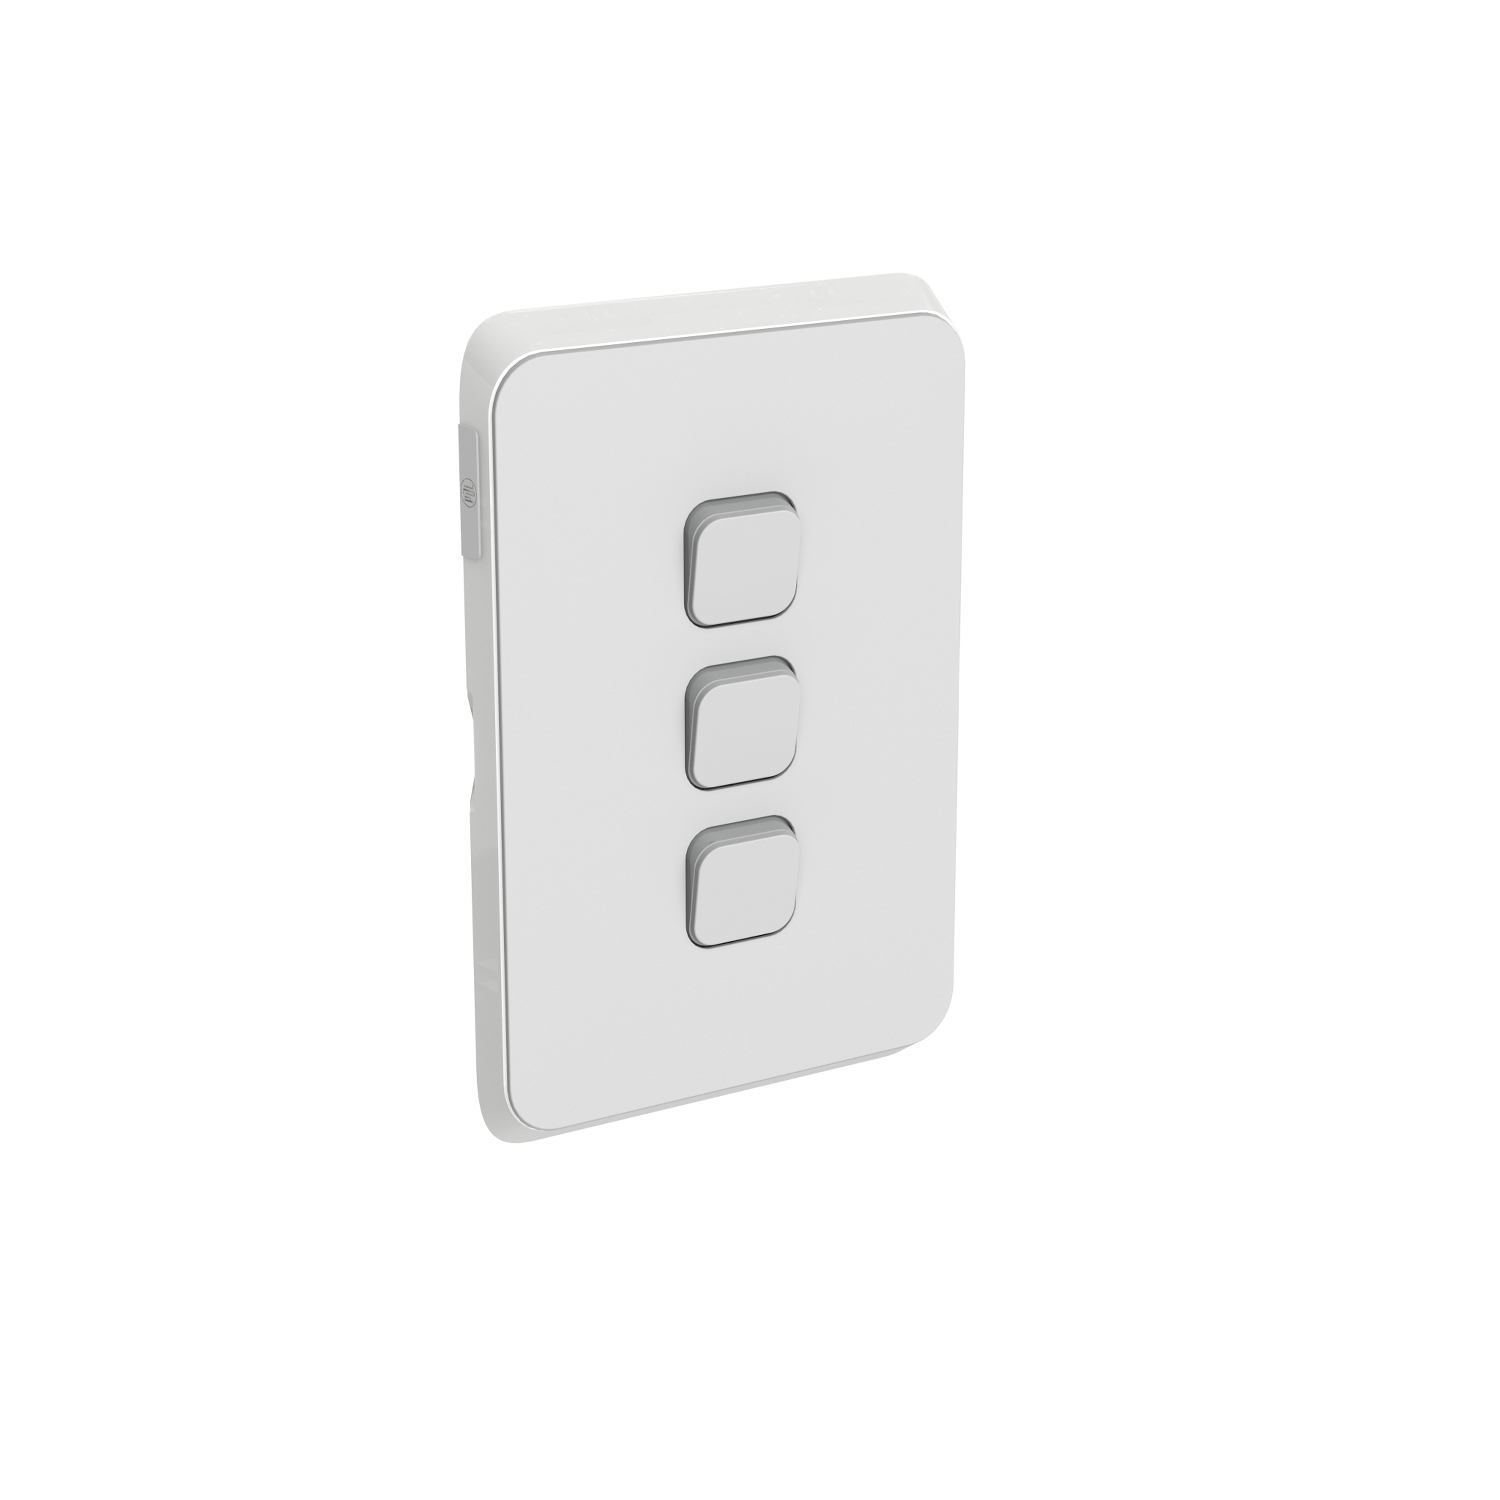 PDL383C-CY - PDL Iconic Cover Plate Switch 3Gang - Cool Grey